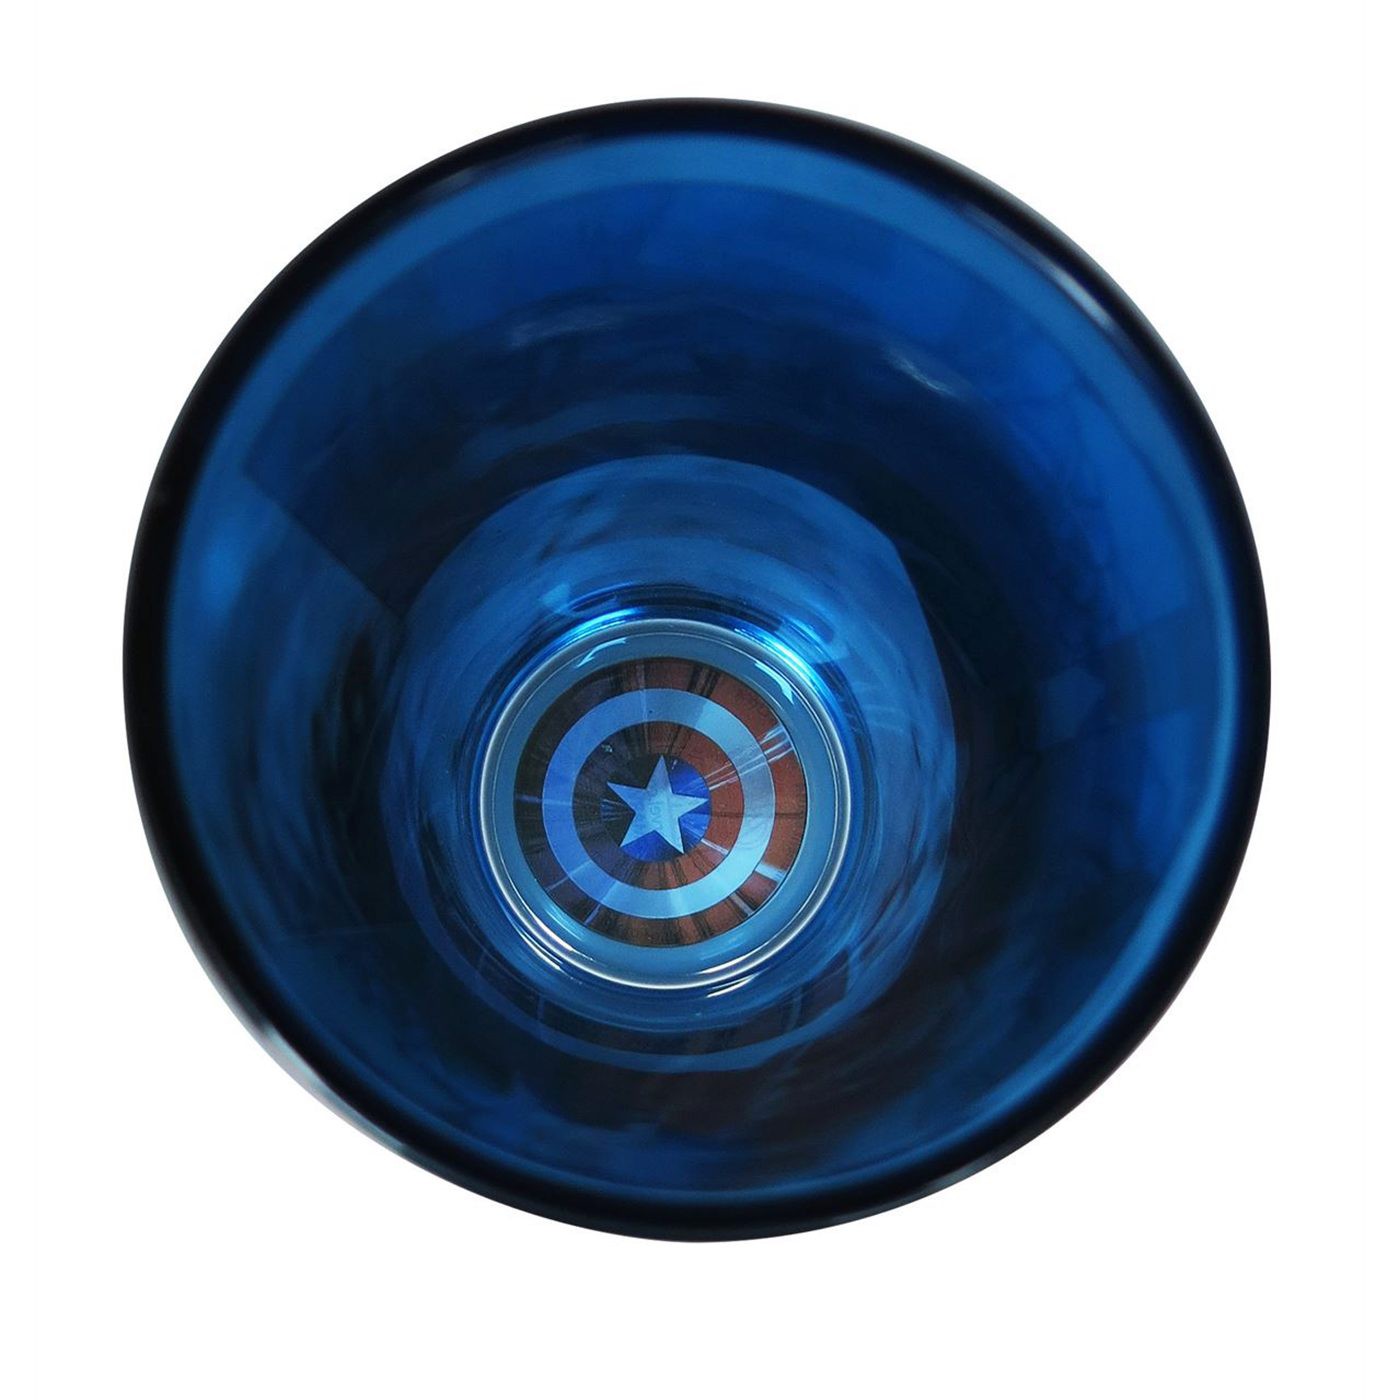 Captain America Image & Shield Bottoms Up Pint Glass